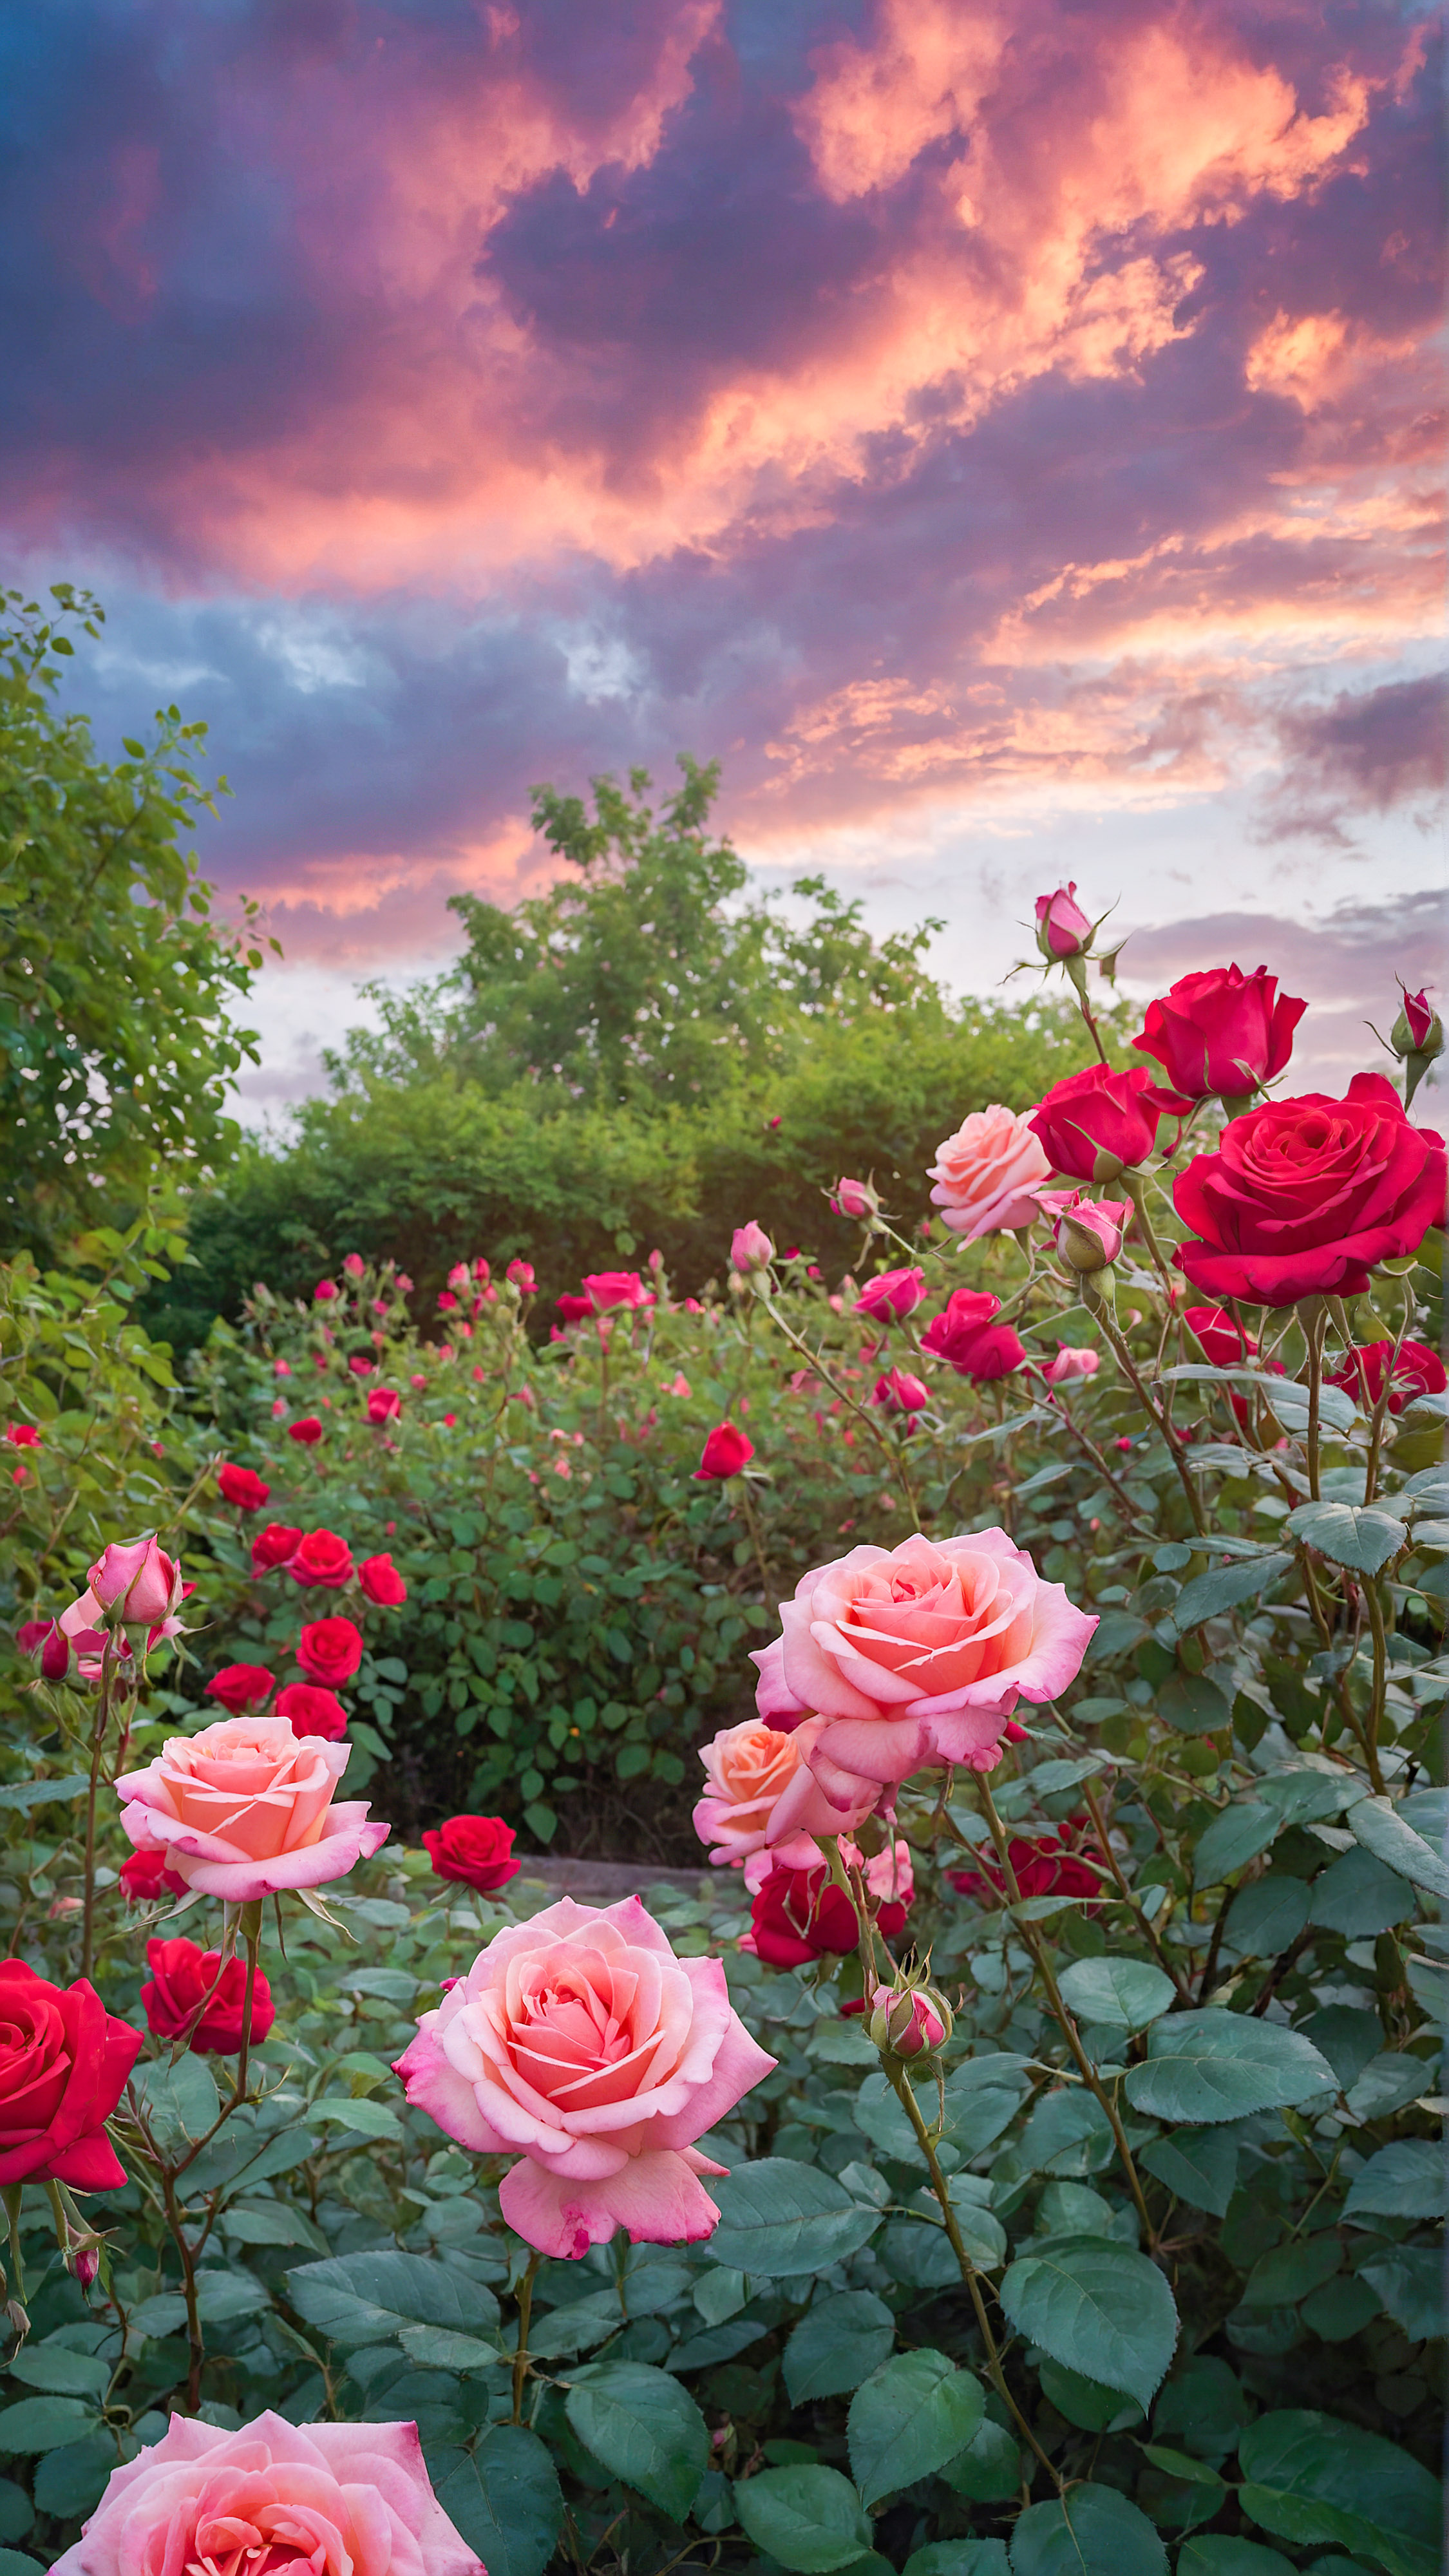 Transform your device’s look with a cute HD iPhone wallpaper, showcasing a vibrant garden filled with blooming pink and red roses under a bright, cloudy sky.